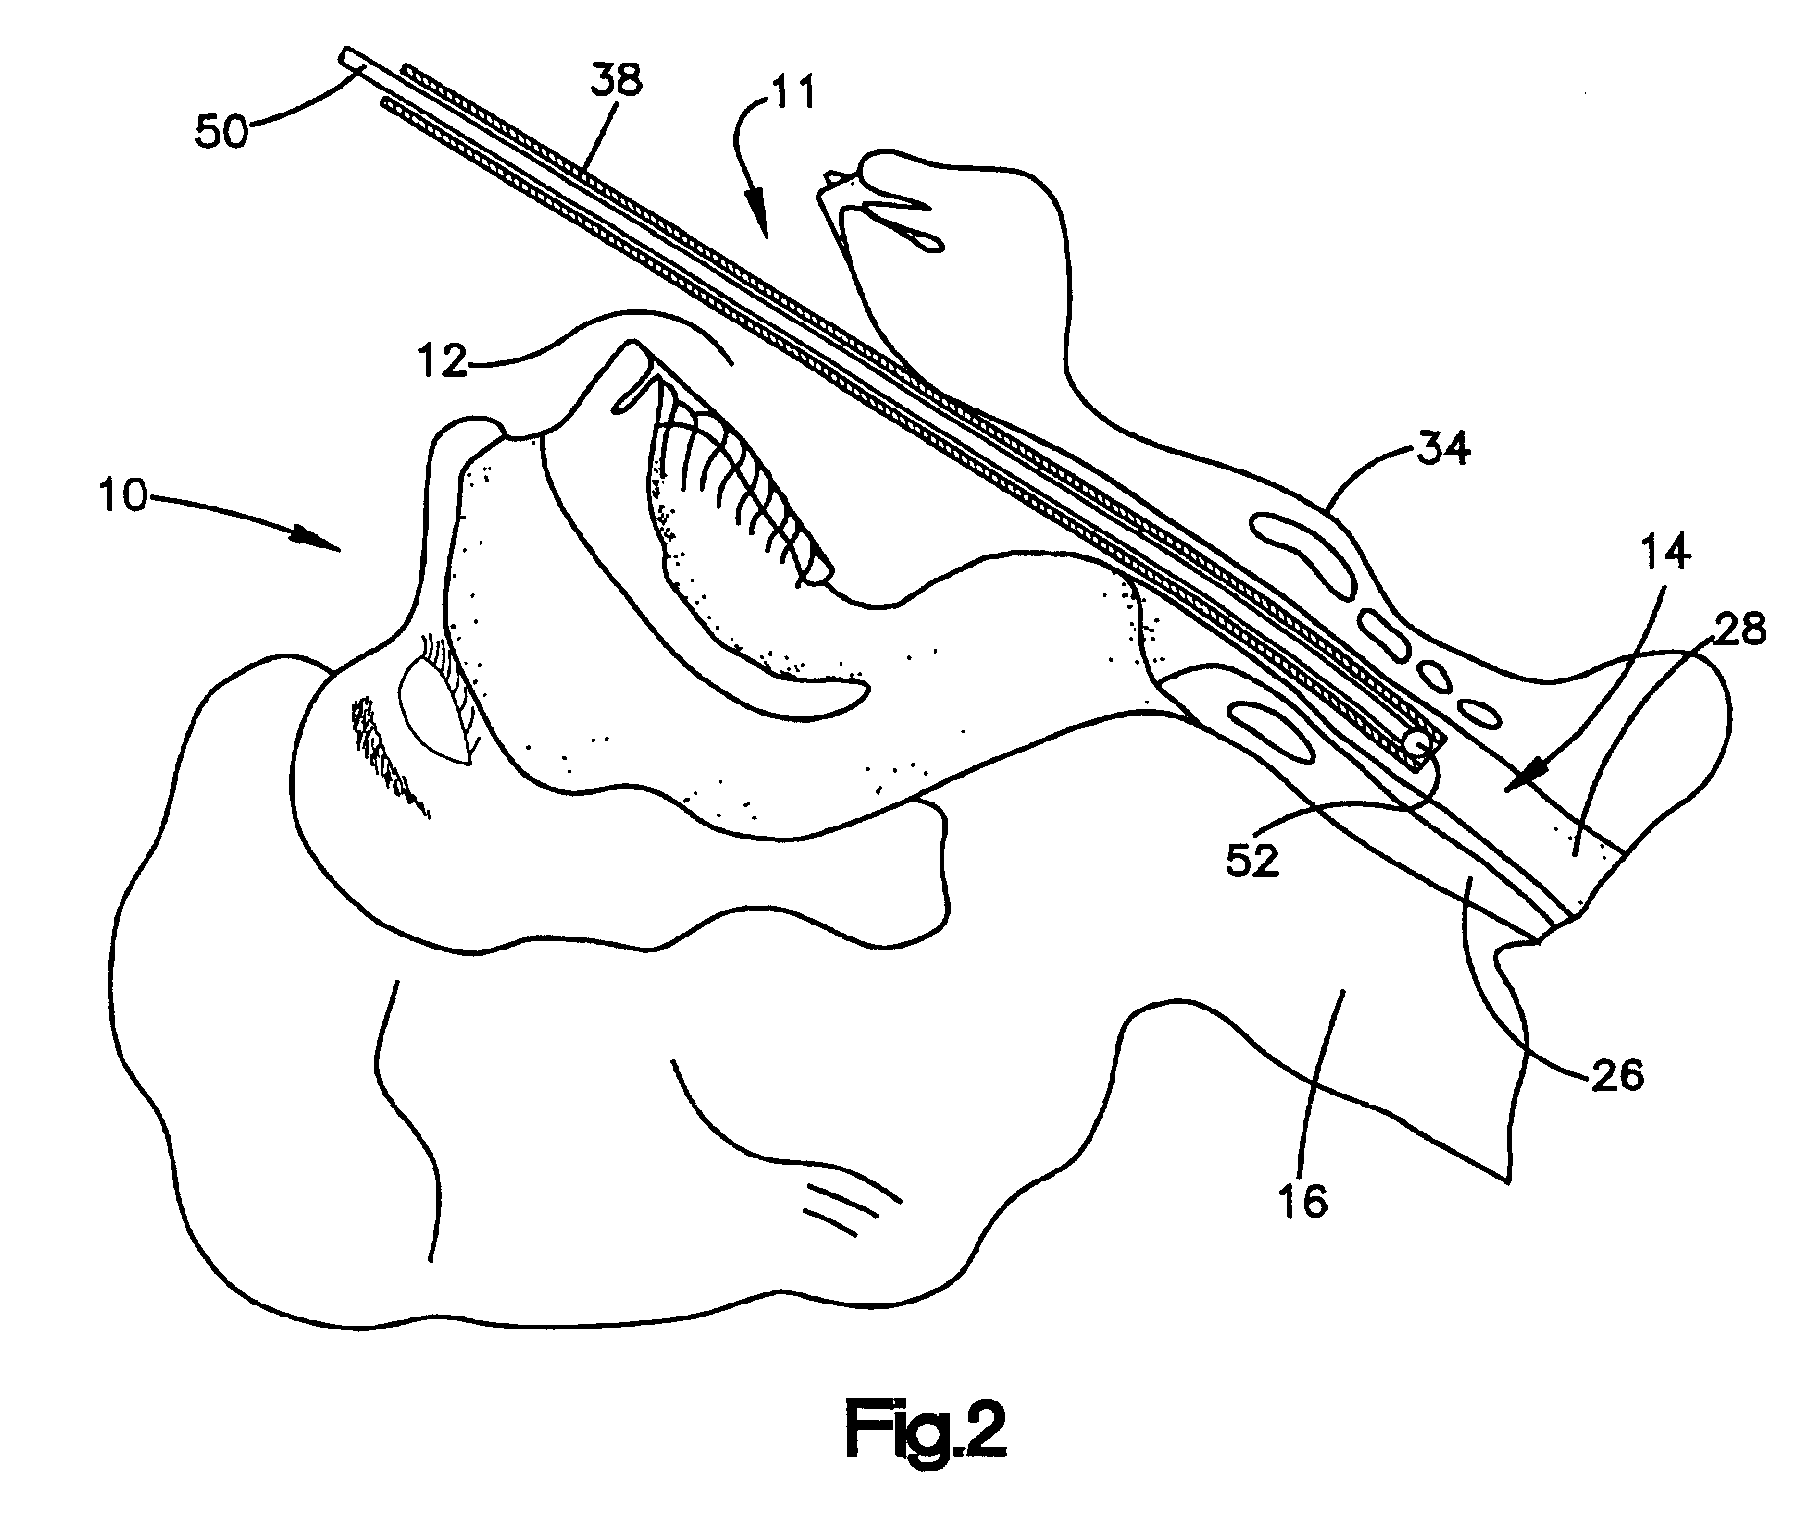 Medicant delivery system and method